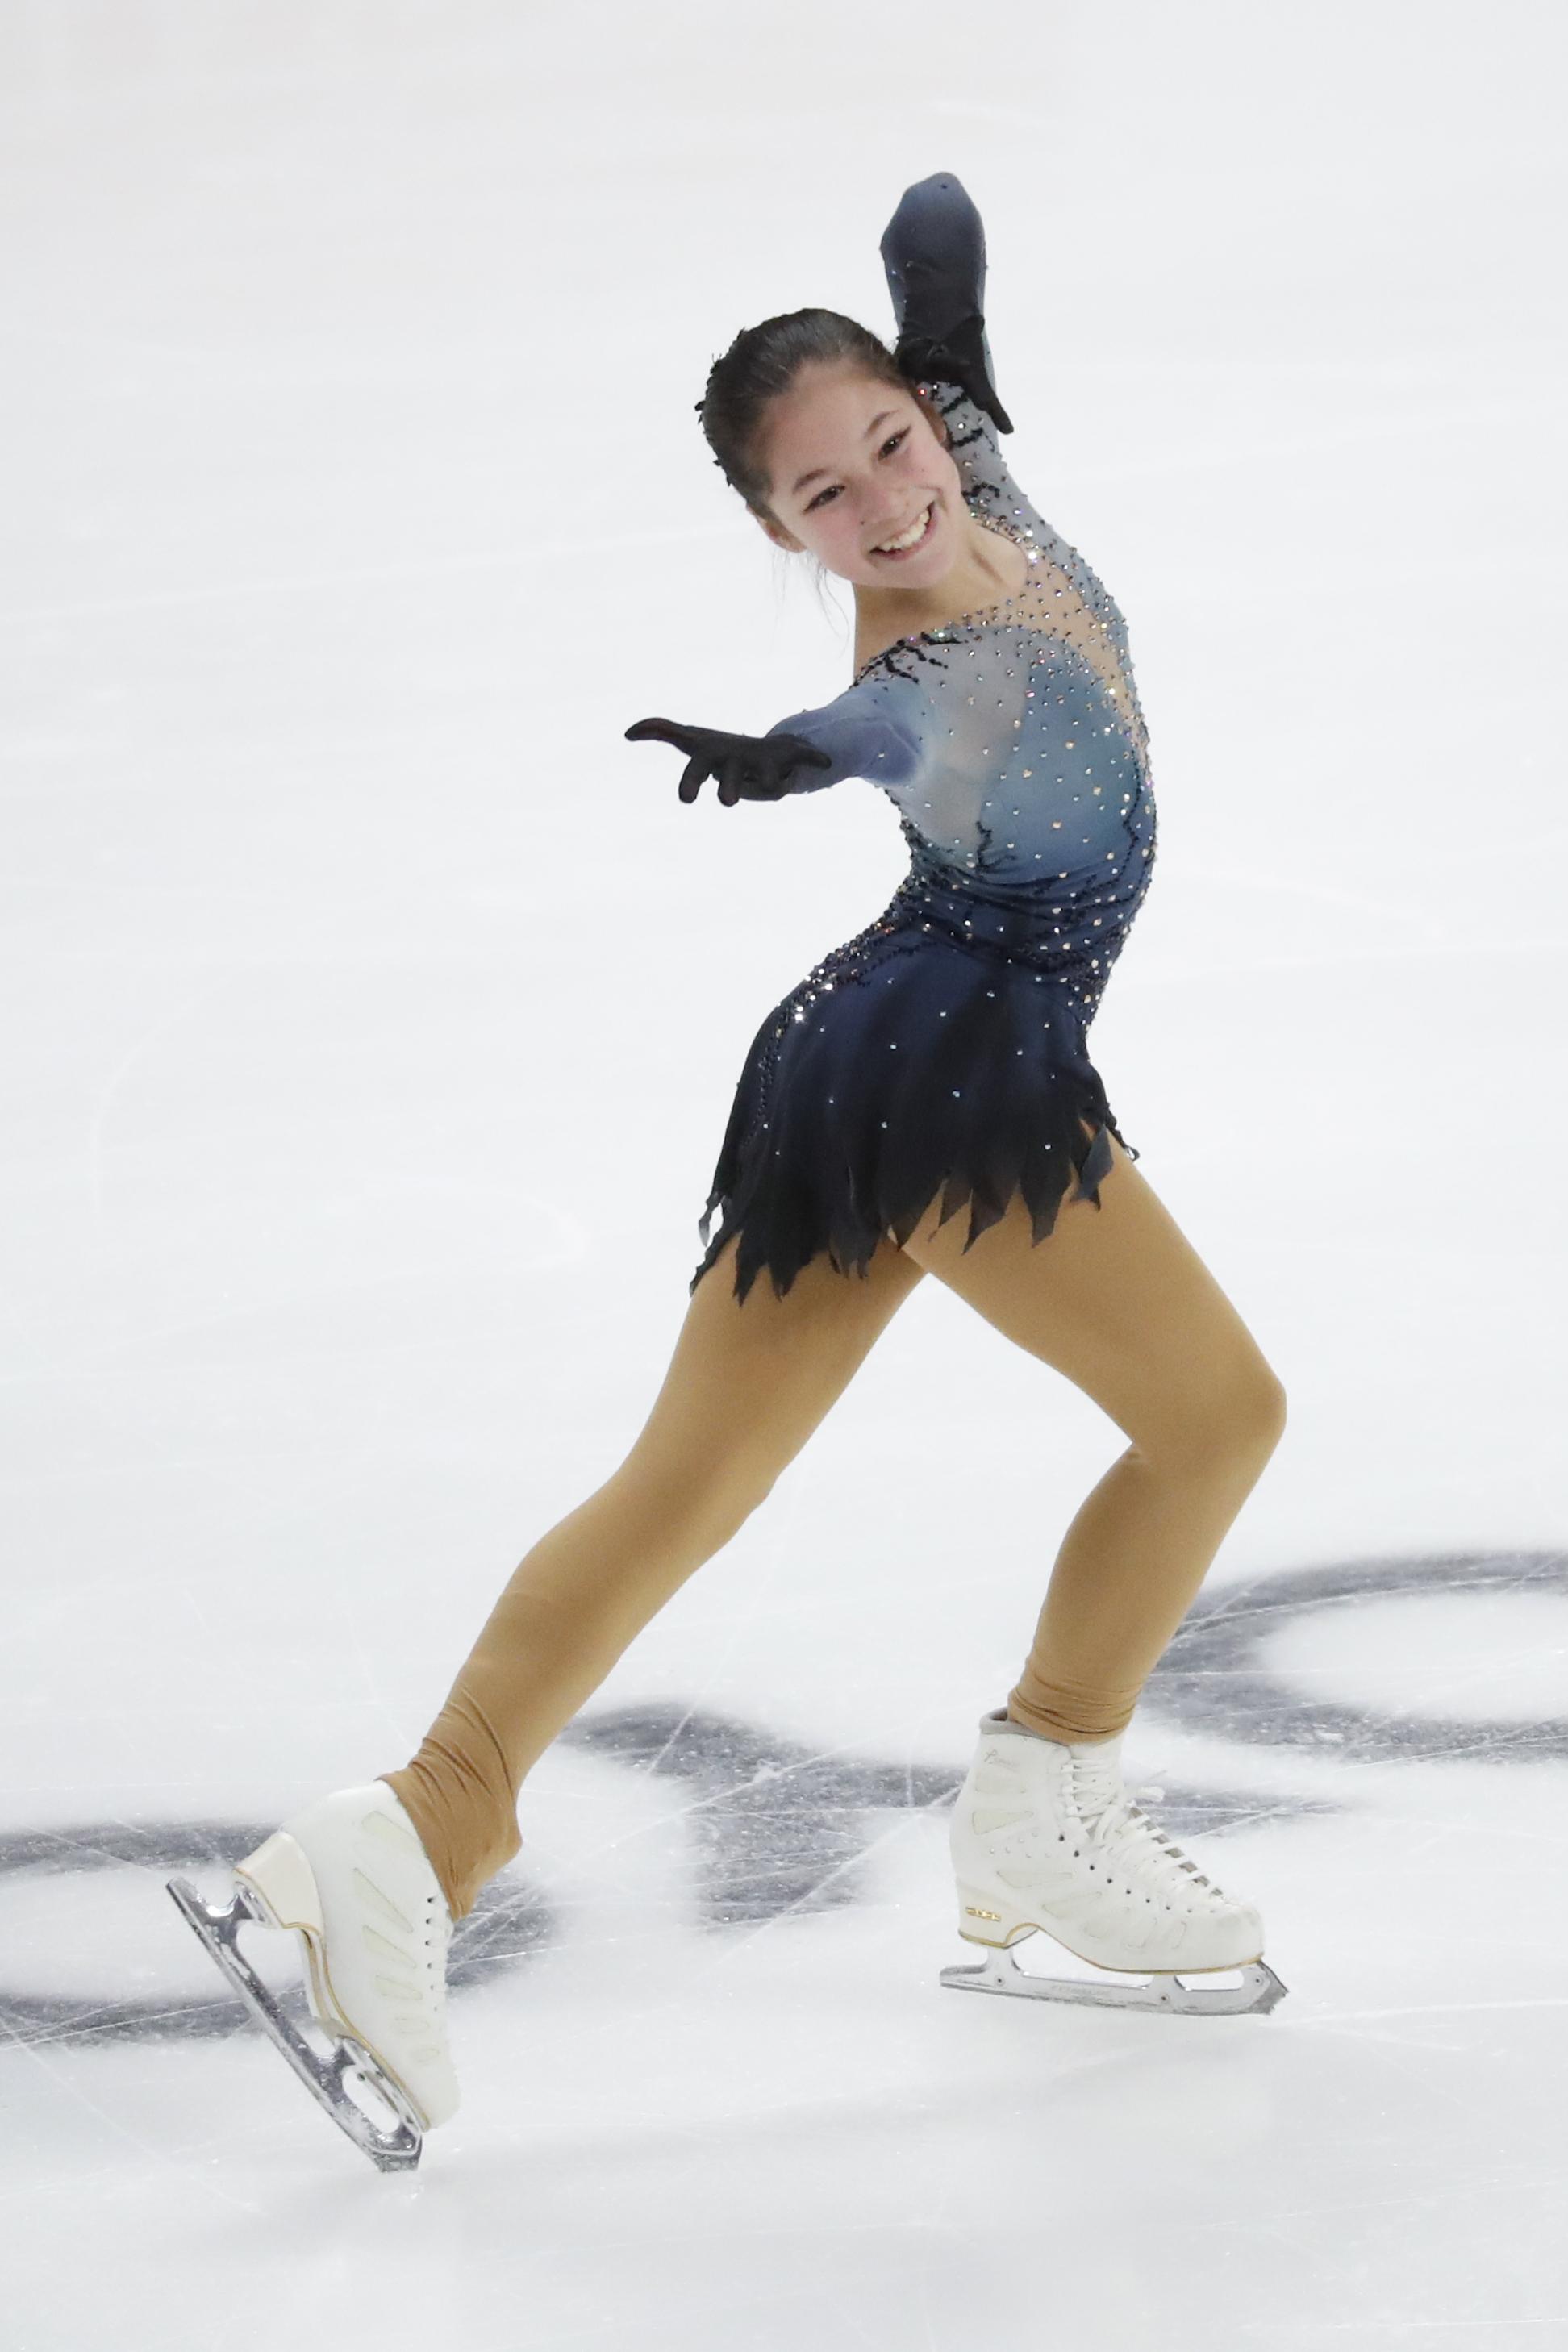 Alysa Liu takes women’s title at nationals at age 13 The SpokesmanReview